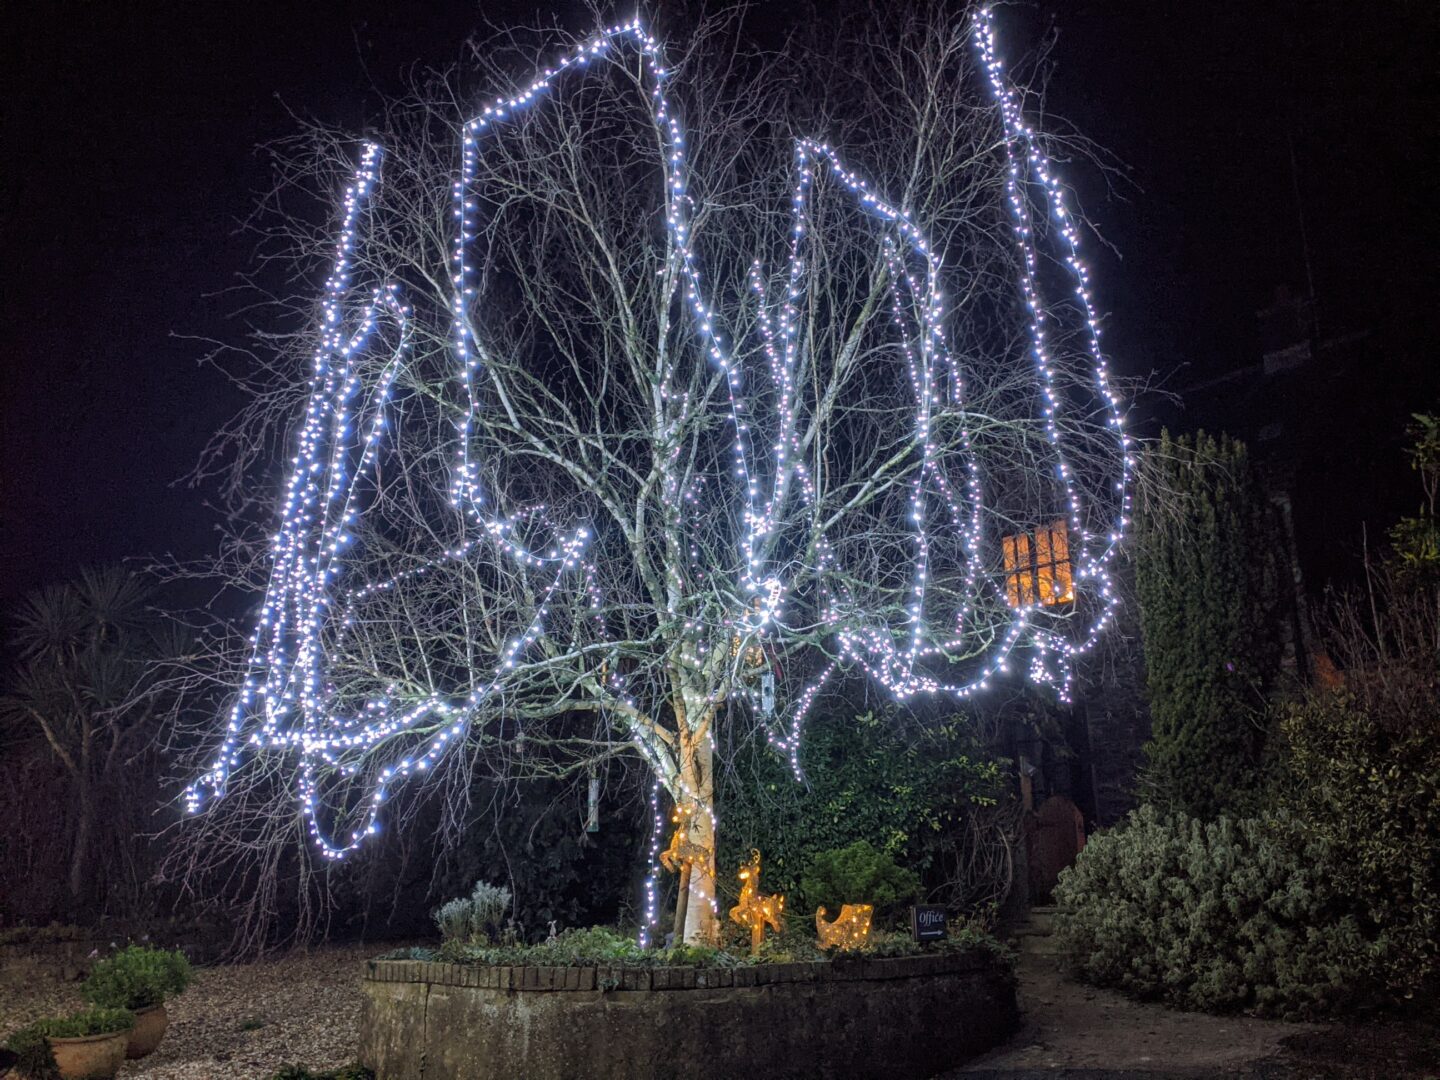 places to stay near kingswear, brixham christmas lights